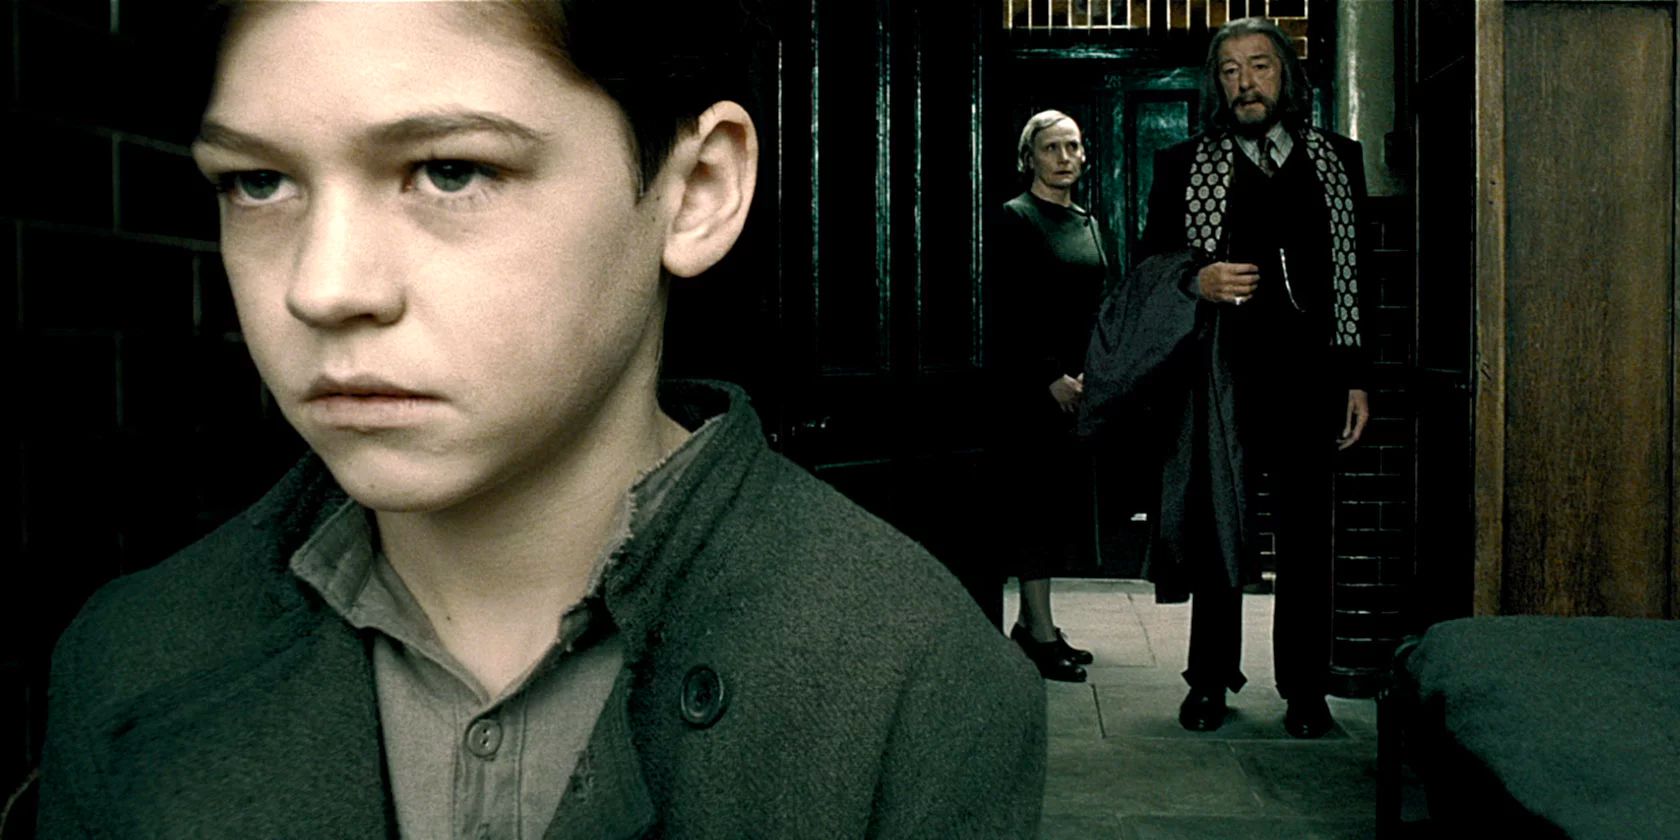 Tom Riddle (Hero Fiennes Tiffin) looks out his window while Dumbledore (Michael Gambon) visits him.